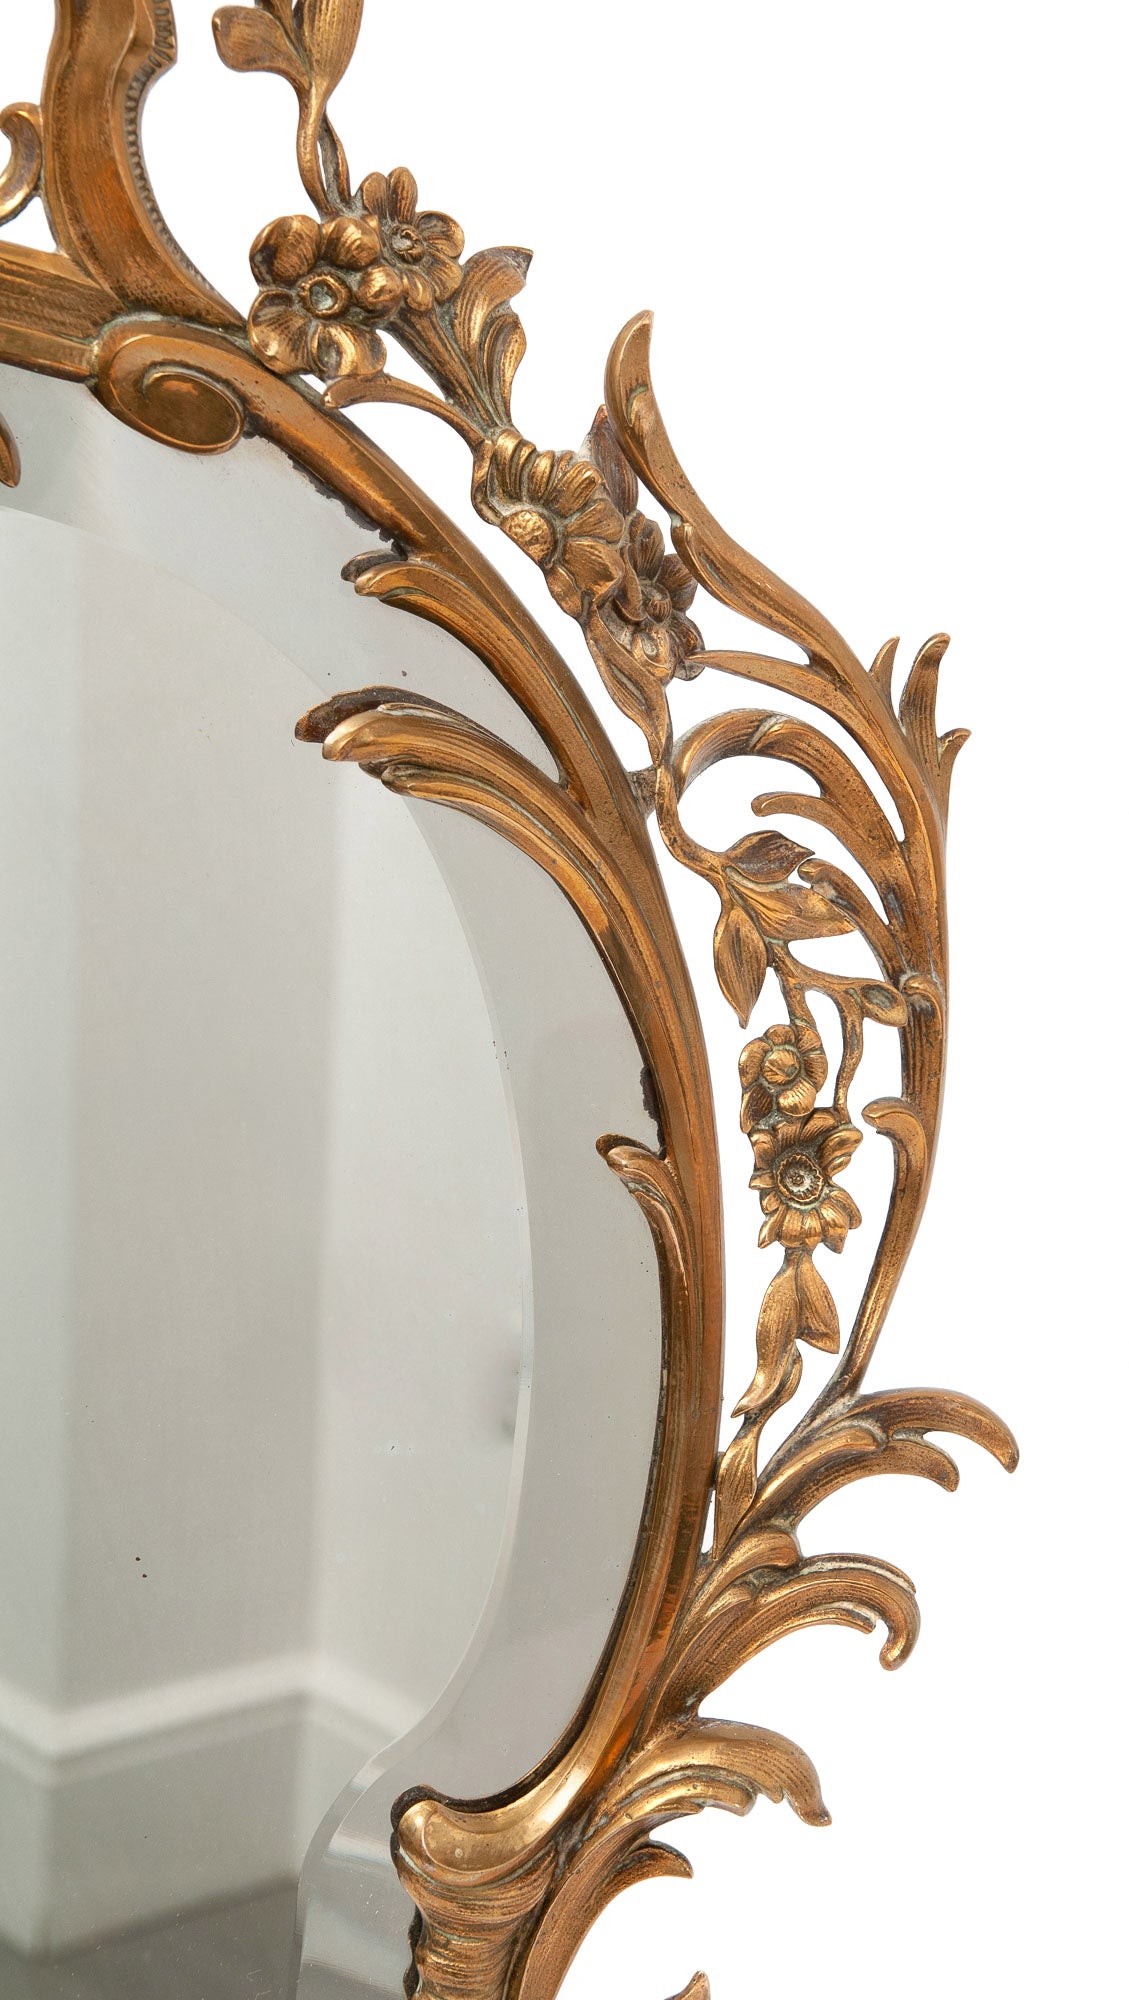 Antique Brass Mirror with Bird Early 20th Century Highly Decorative Shape (Code 1457)